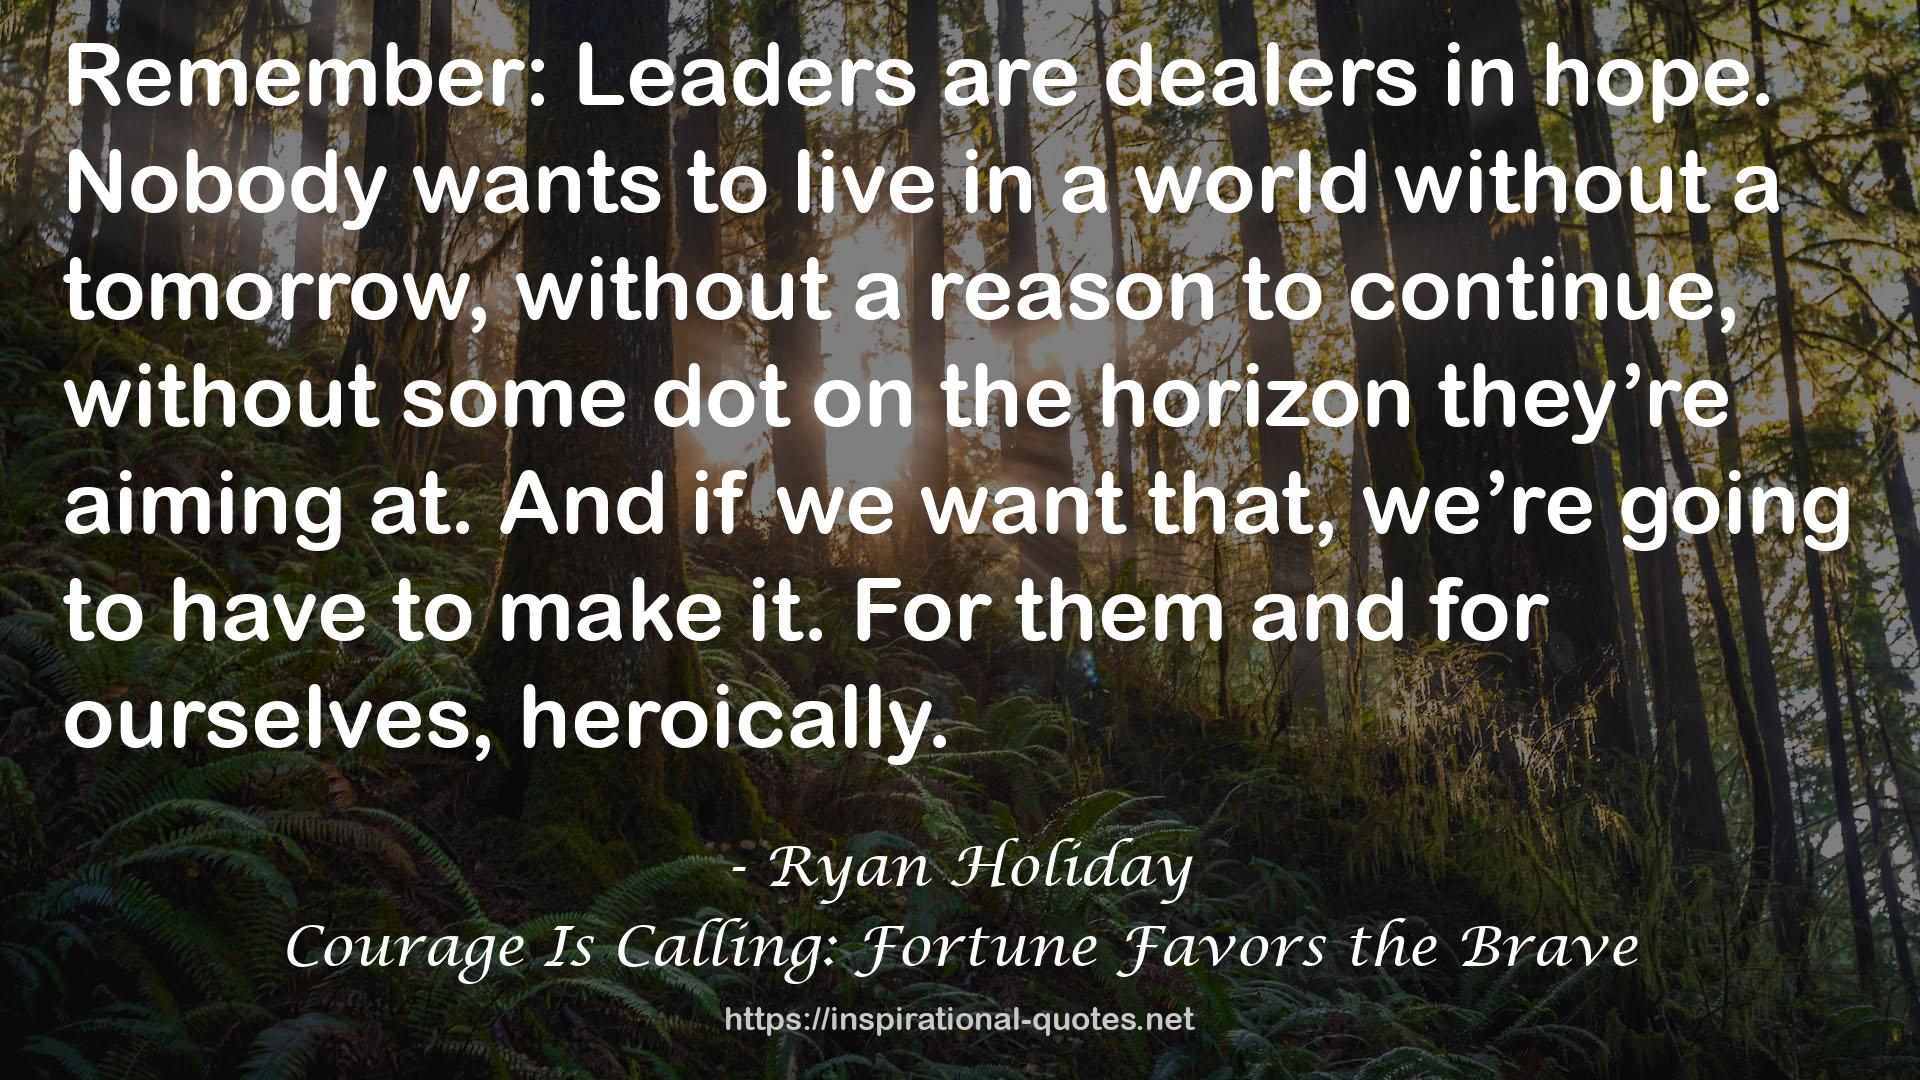 Courage Is Calling: Fortune Favors the Brave QUOTES